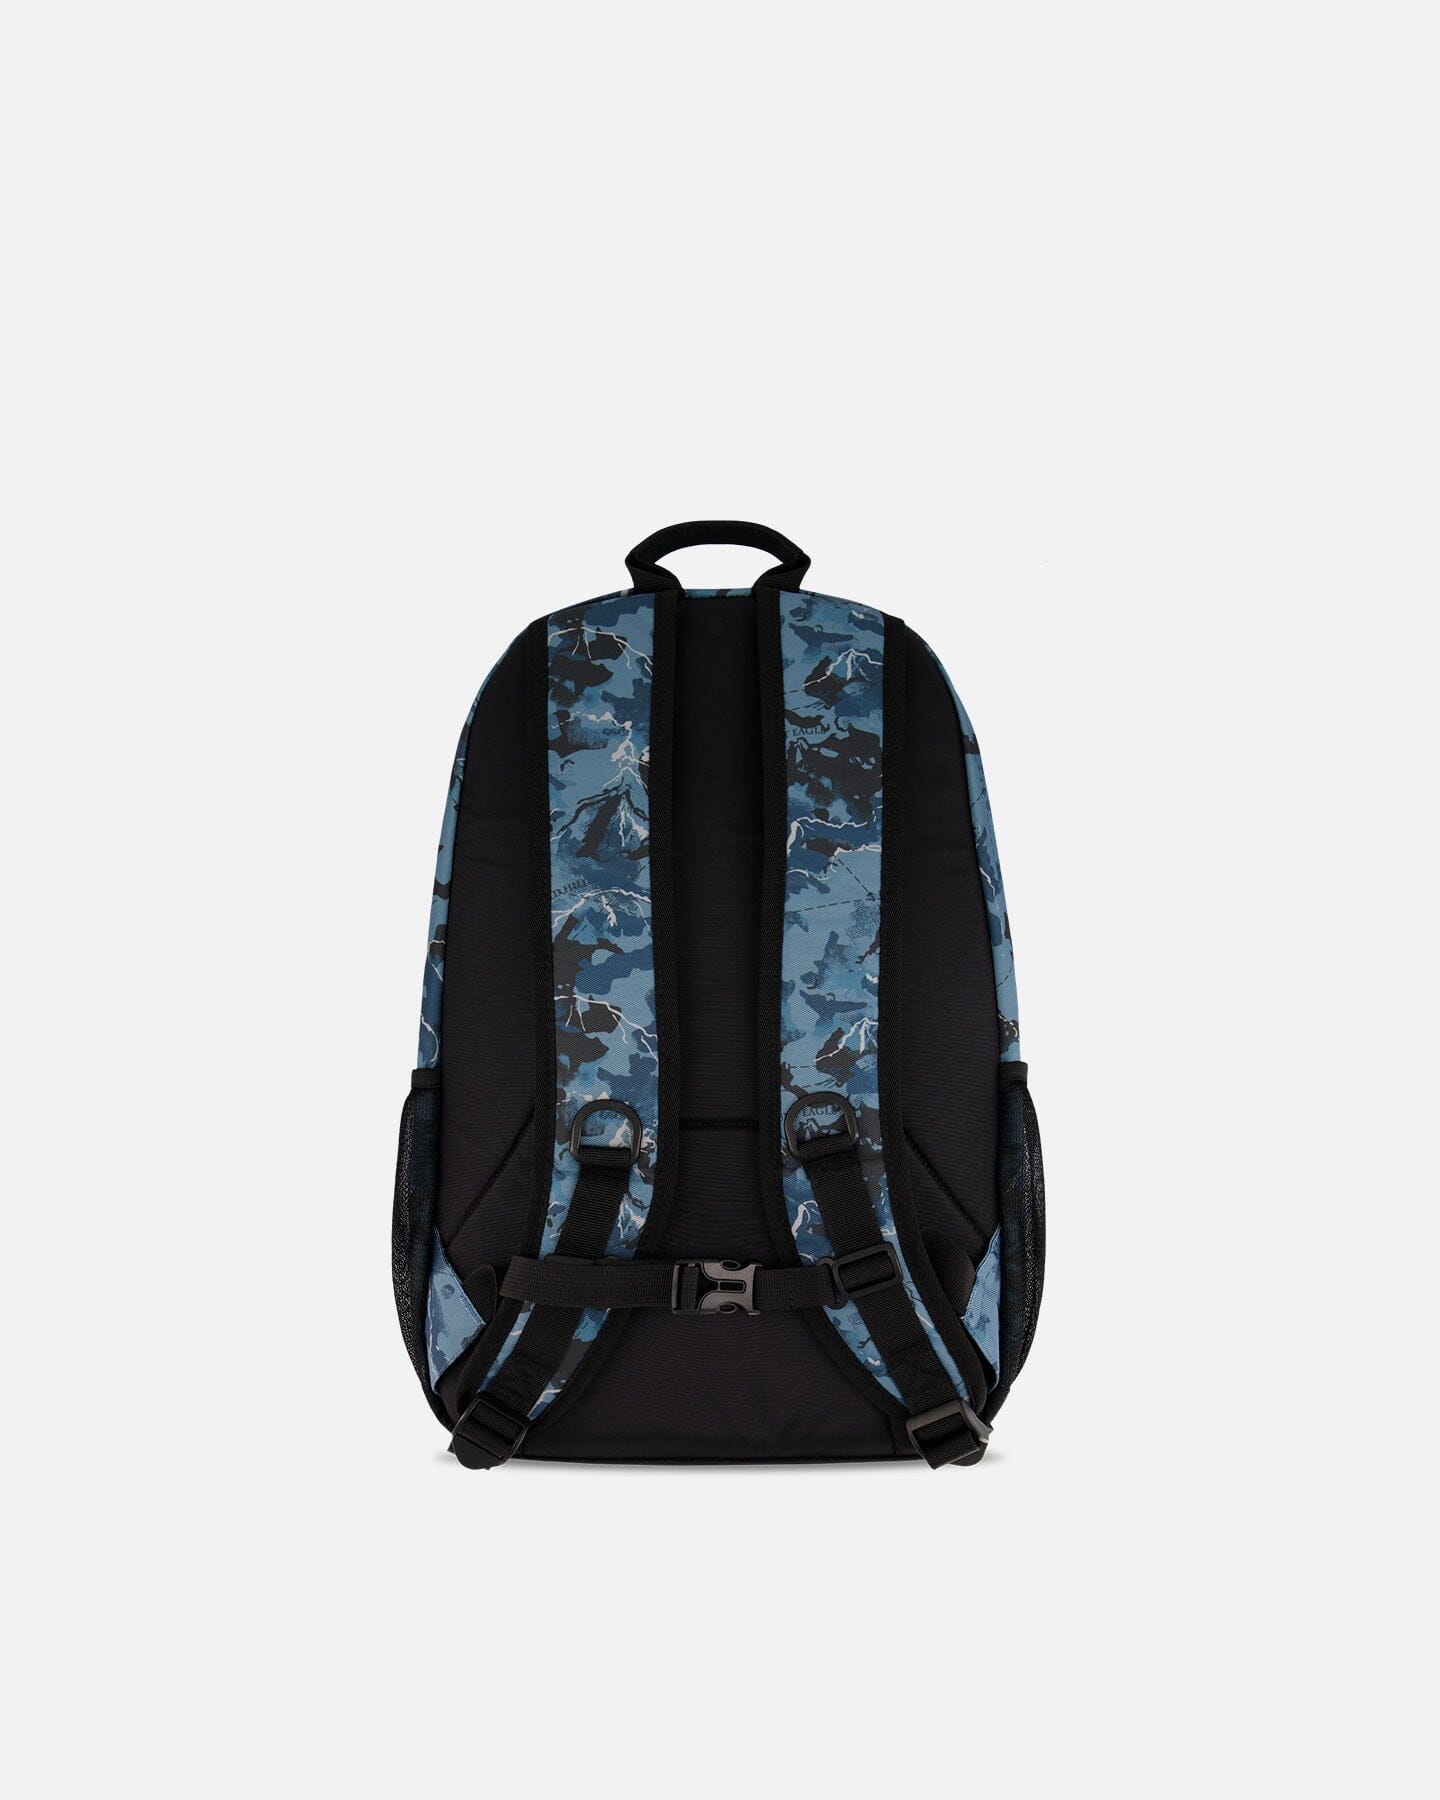 Kids Backpack Blue And Black Cartography Print - F20ZSD_017